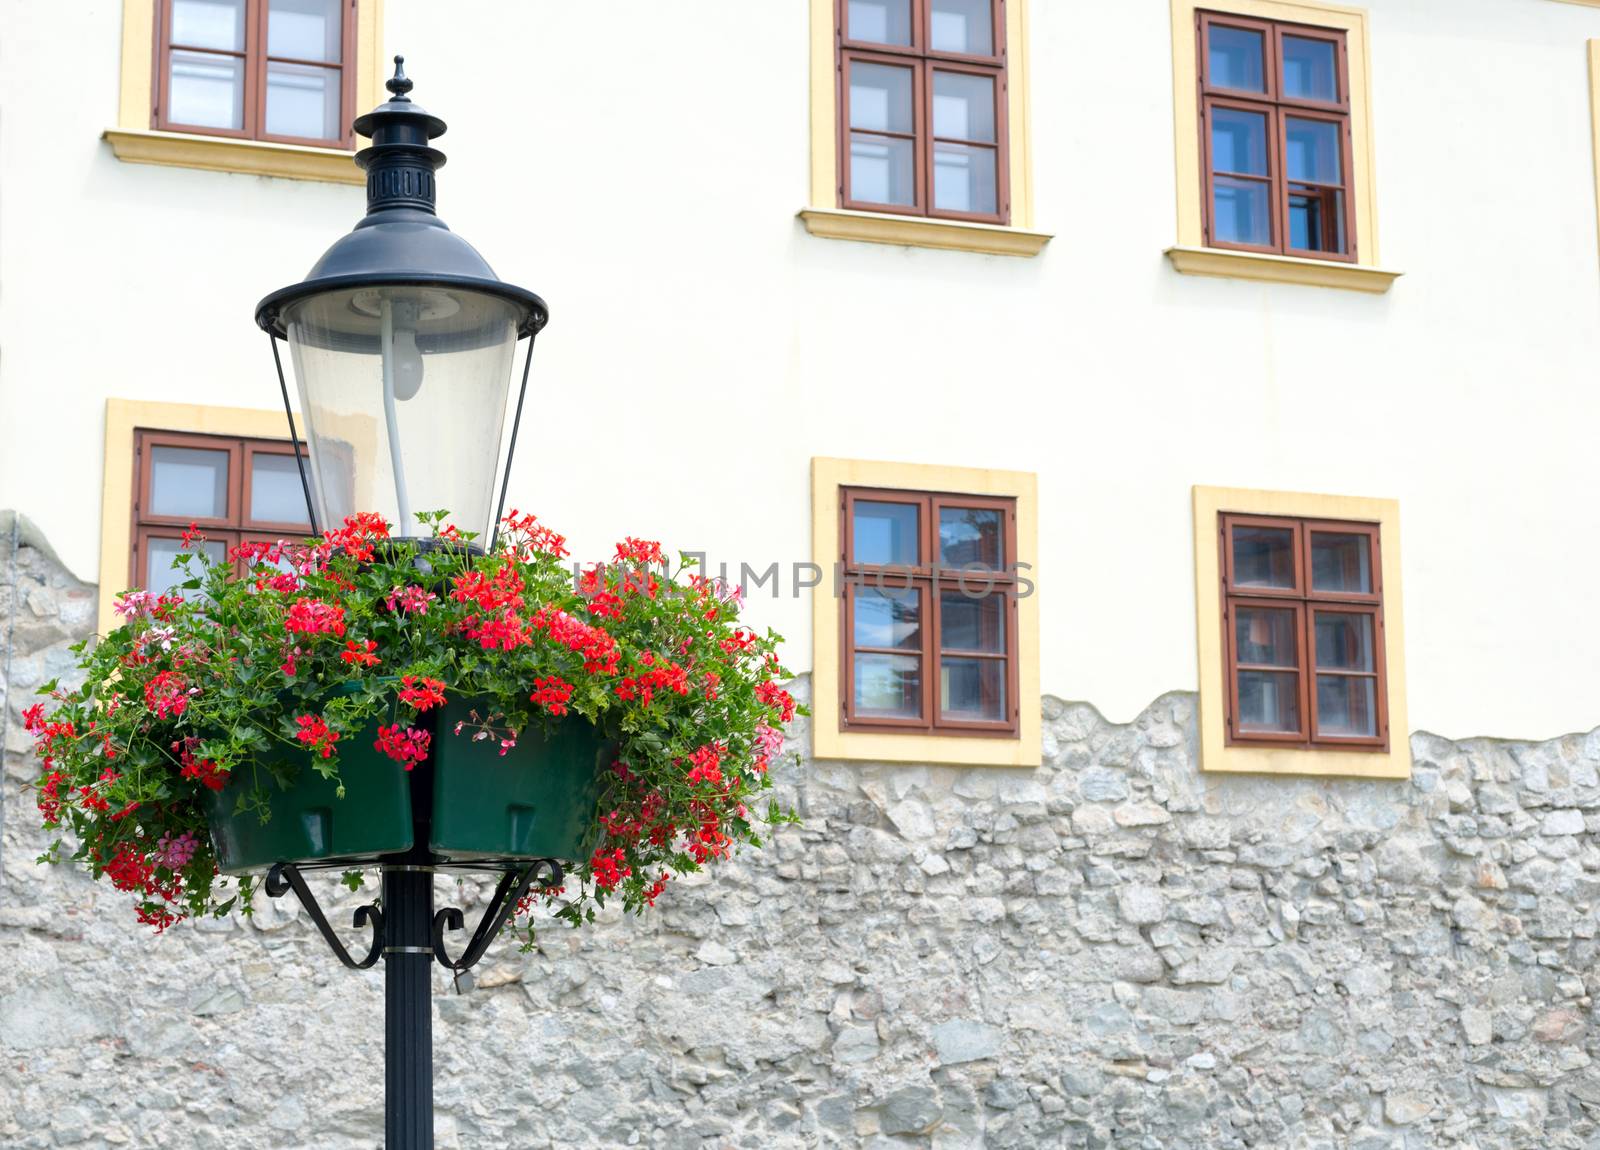 street lamp with hanging flower baskets